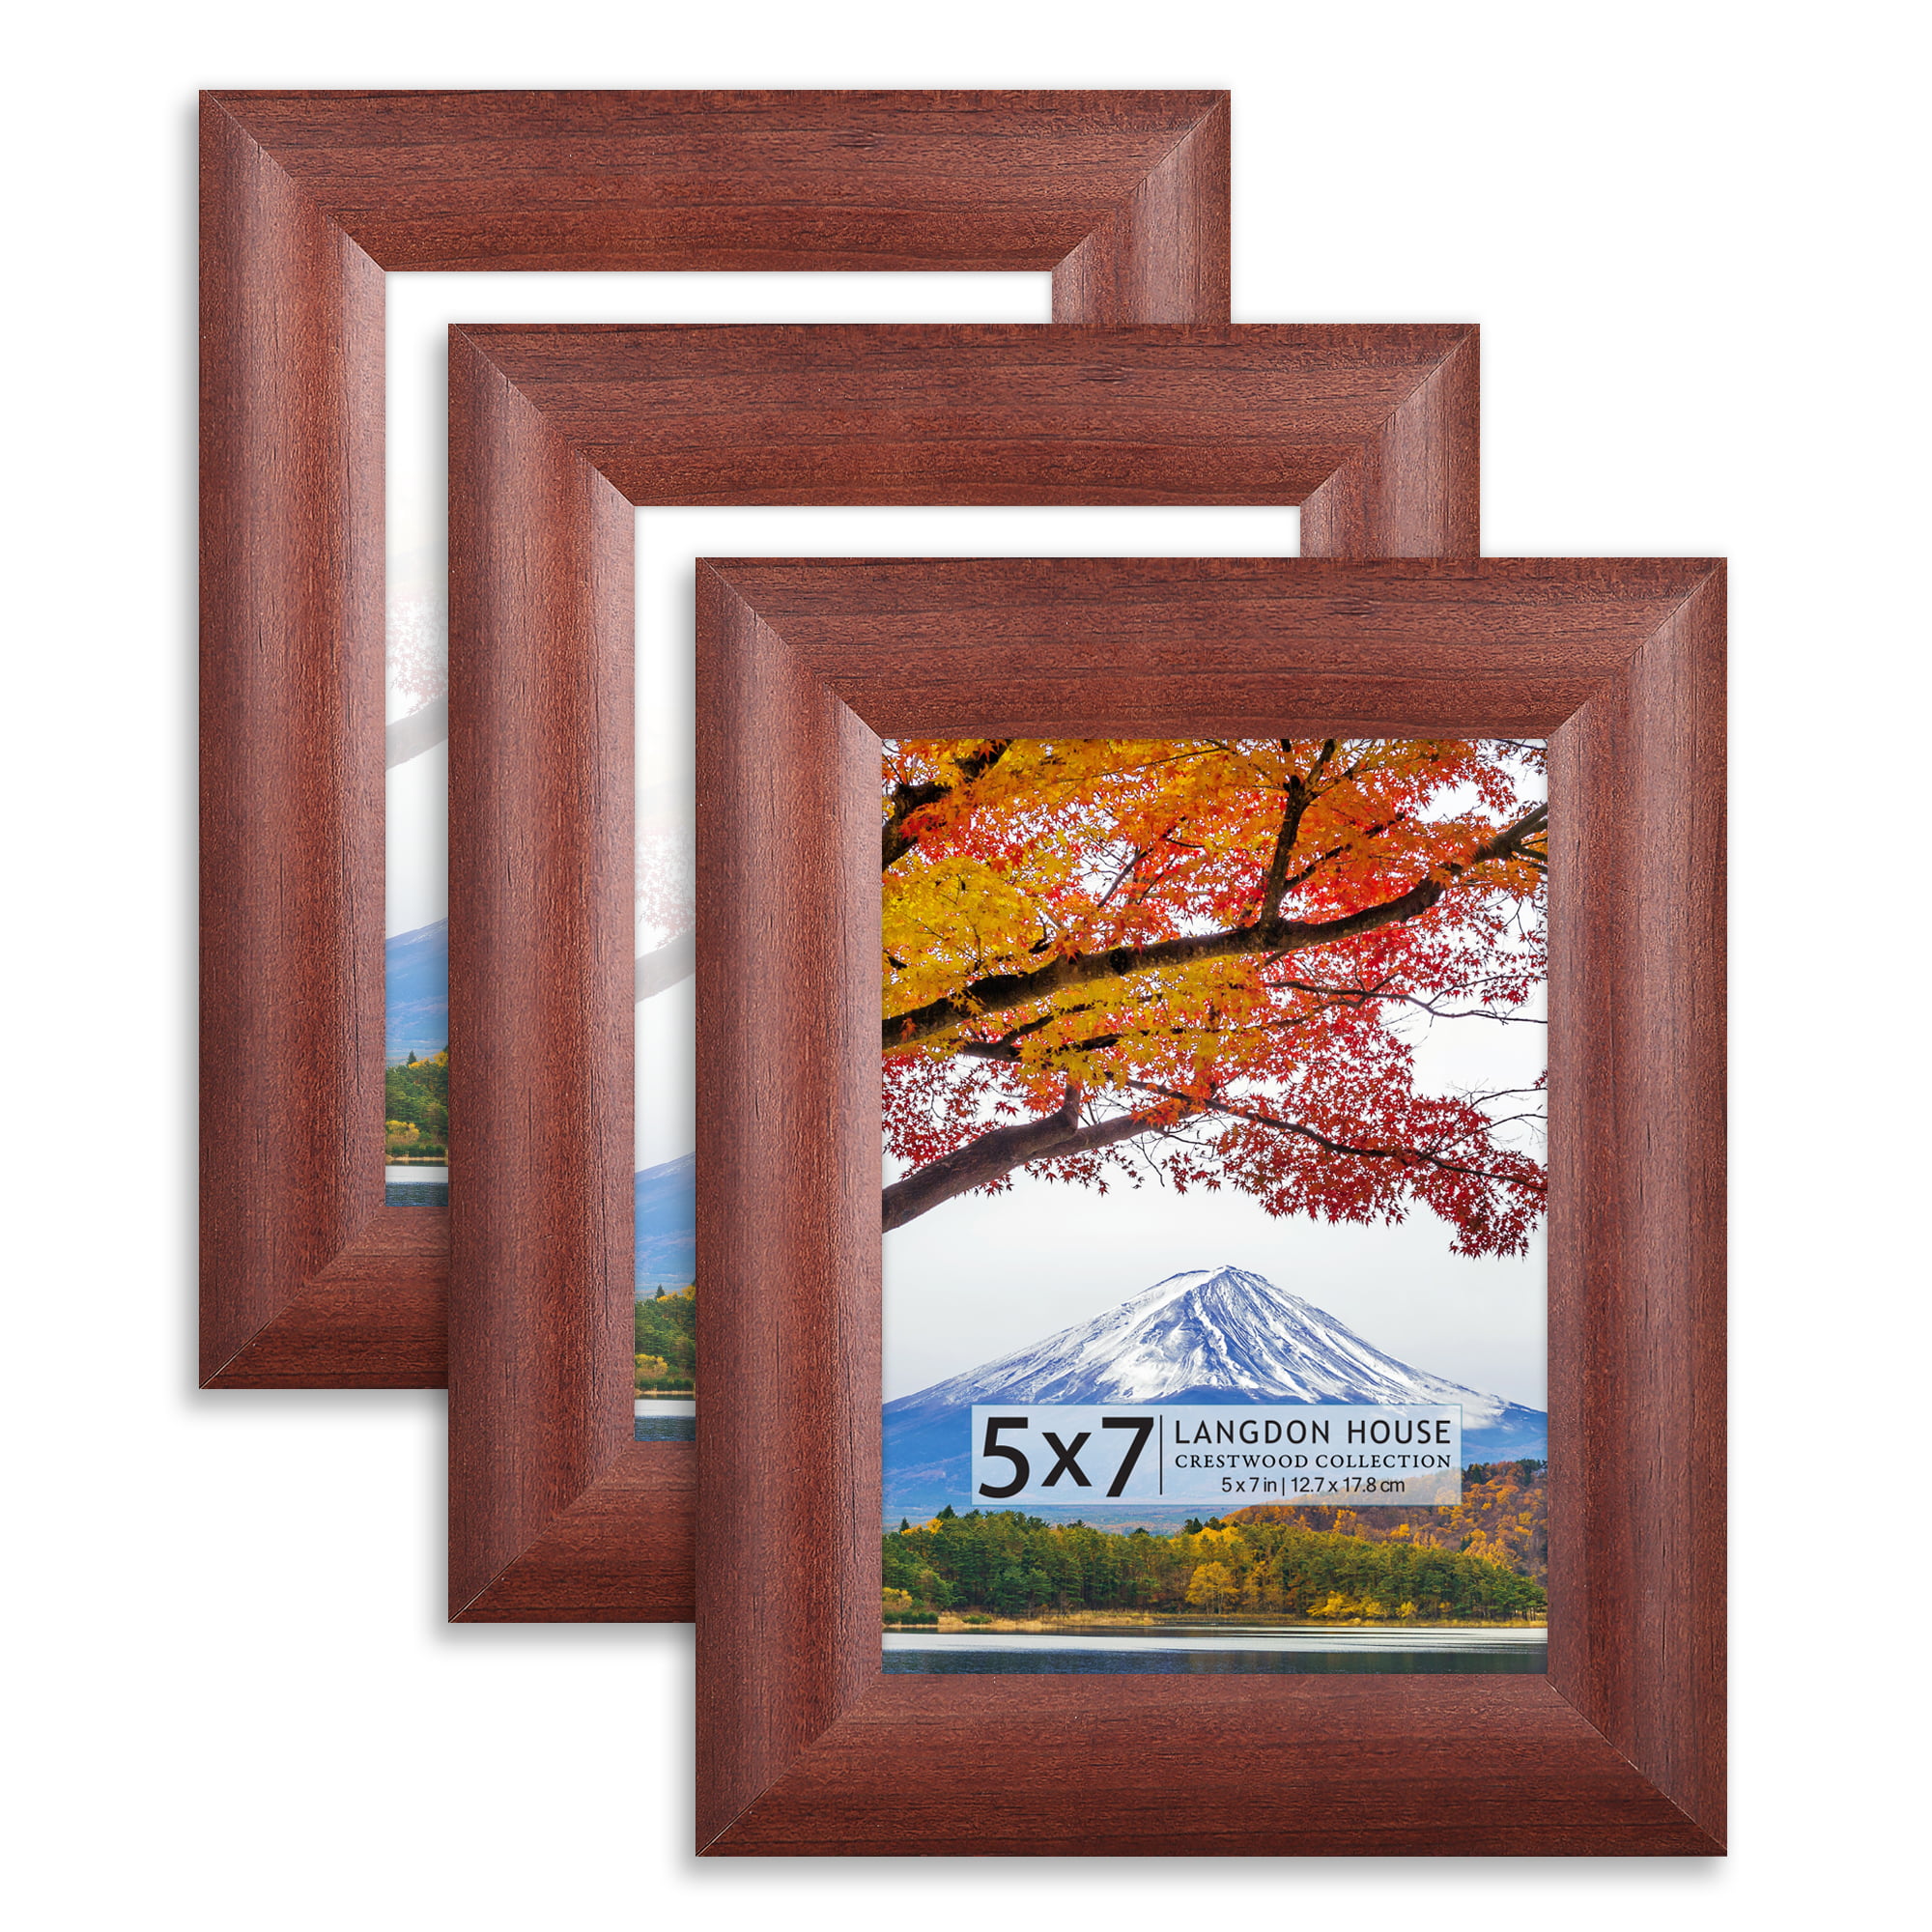 Pair of Walnut Wood Frames for 8 x 12 PicturesPrints with Matte.